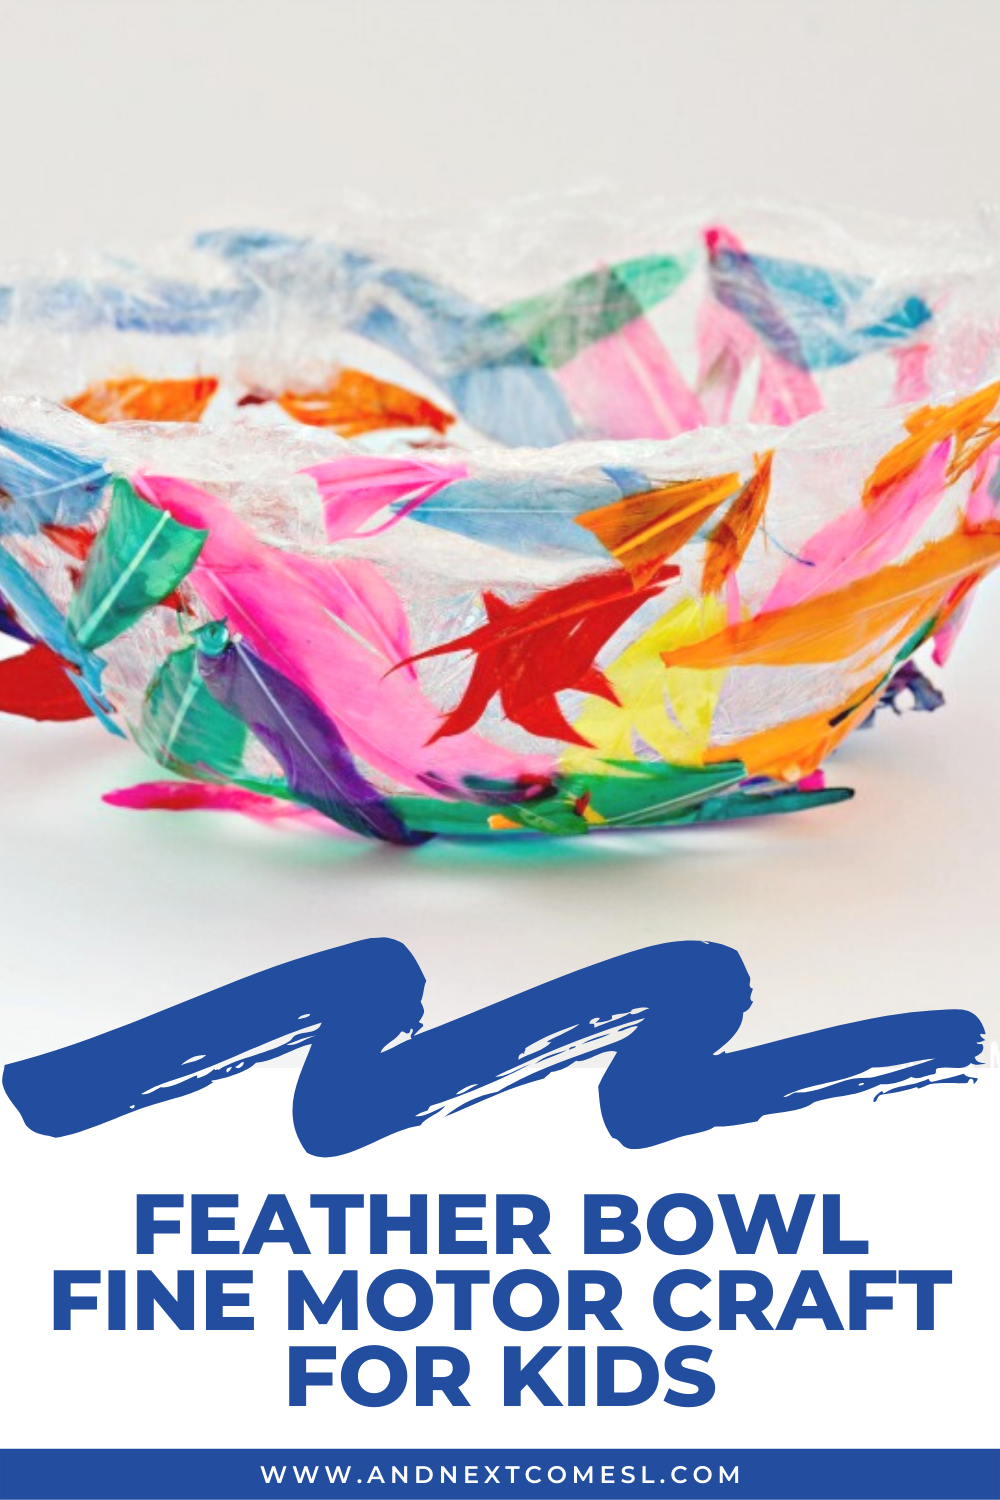 Feather bowl fine motor craft for kids